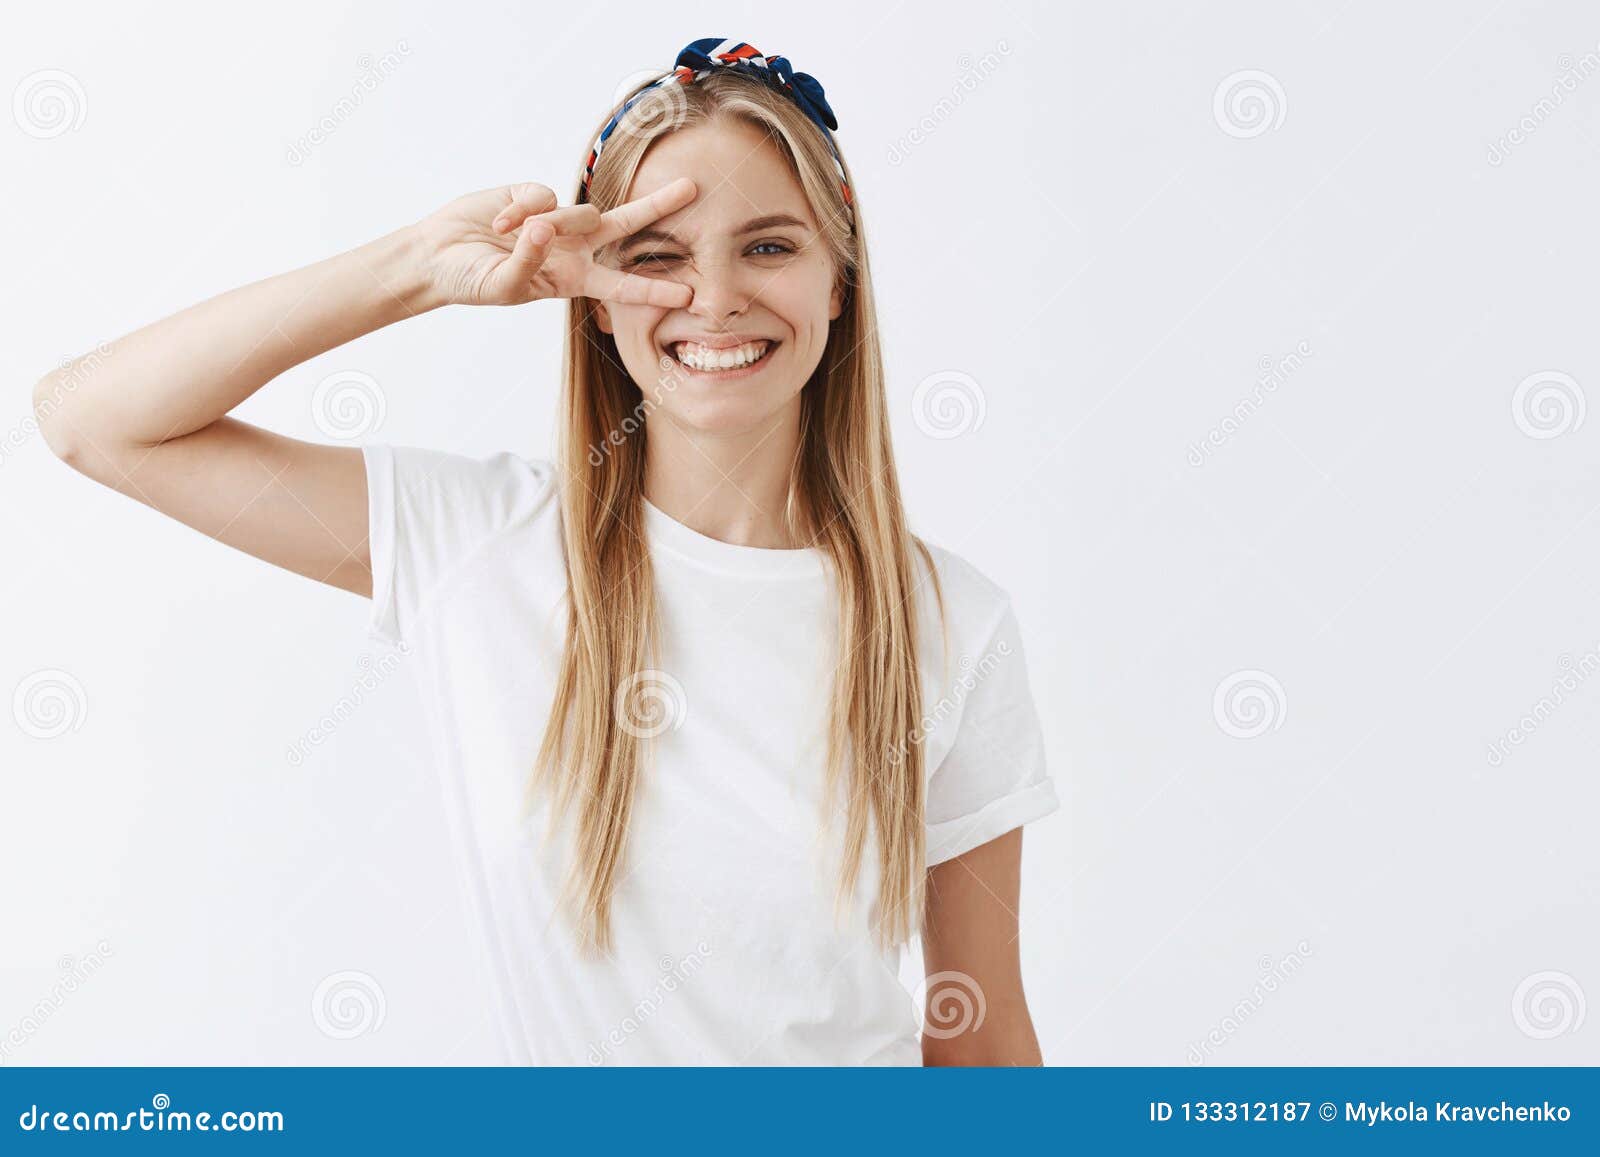 Portrait of Joyful Funny and Playful Young Caucasian Blond Girl with ...